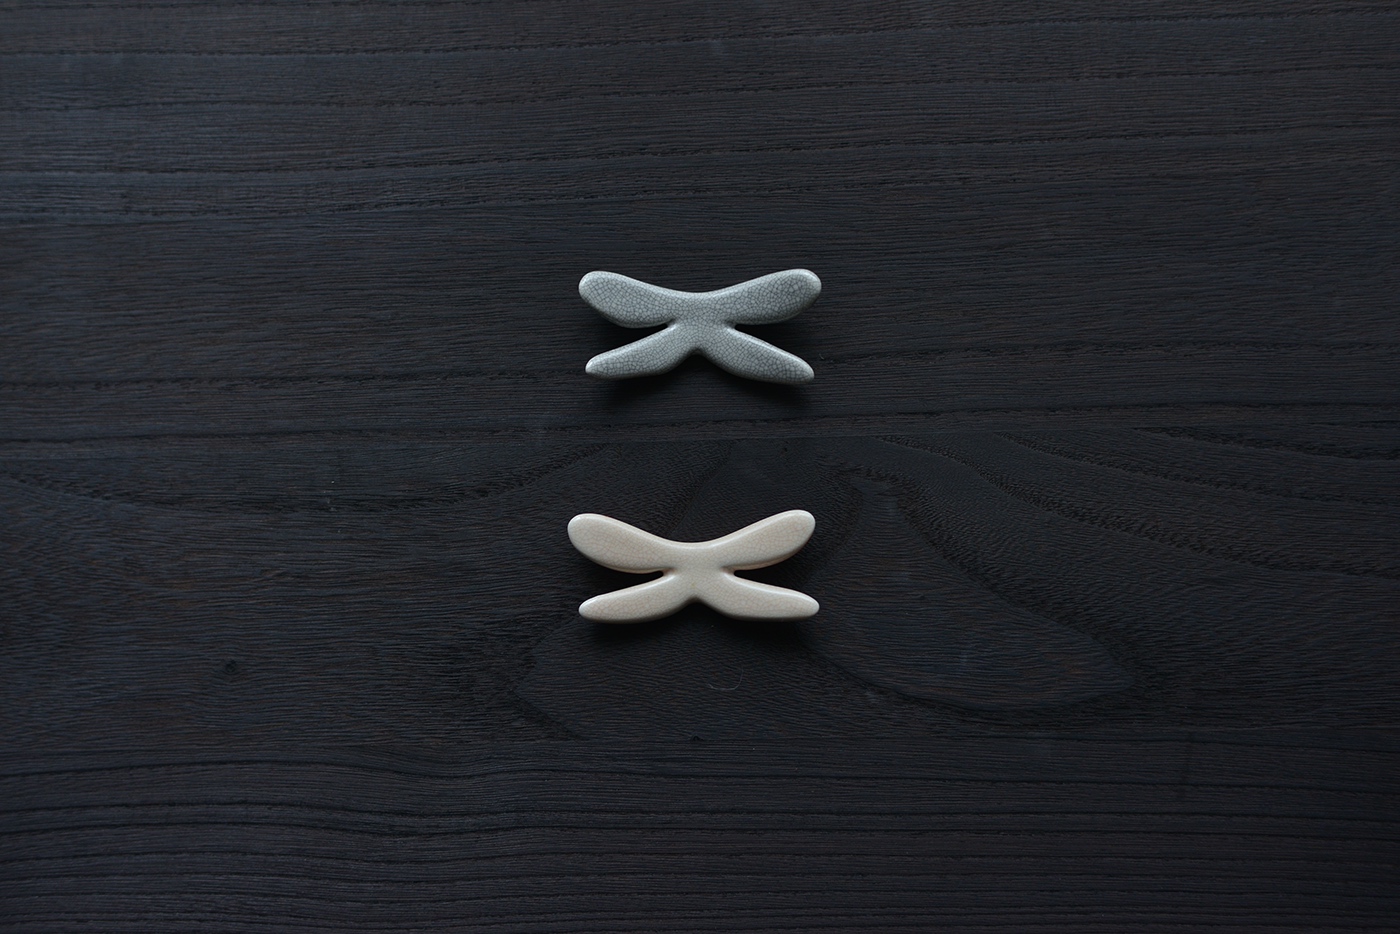 dragonfly chopstick rest ceramic design product kitchen material cmf cutlery japan